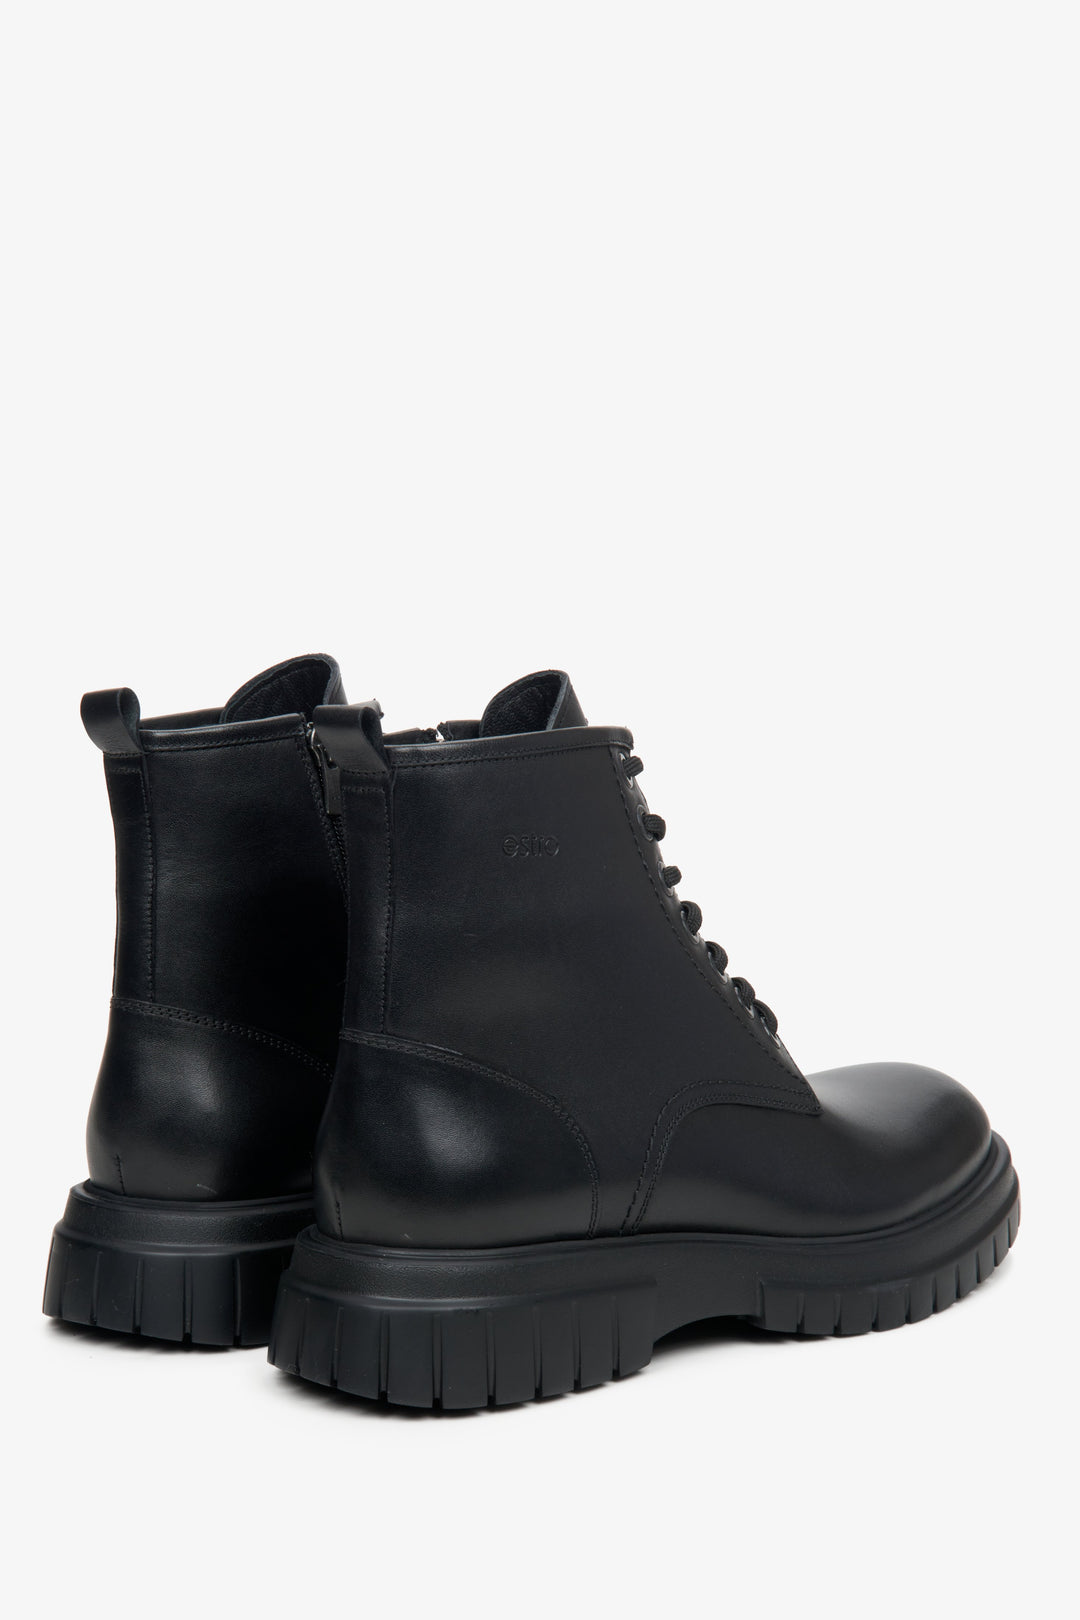 Men's black leather  ankle boots for autumn.